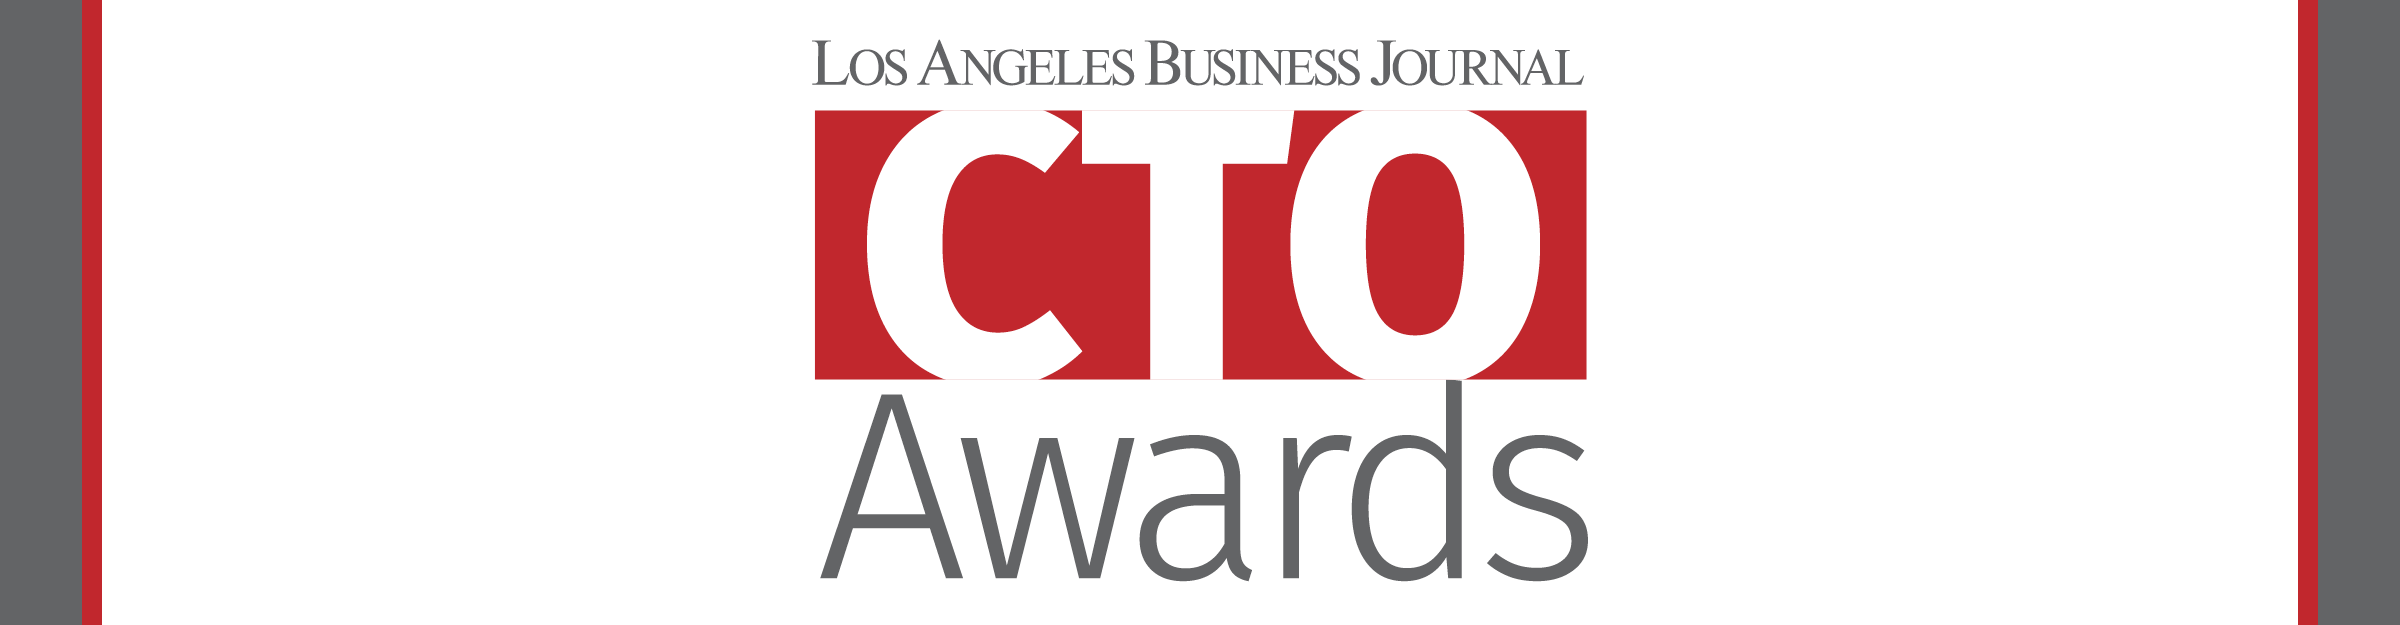 Los Angeles Business Journal CTO Event Banner